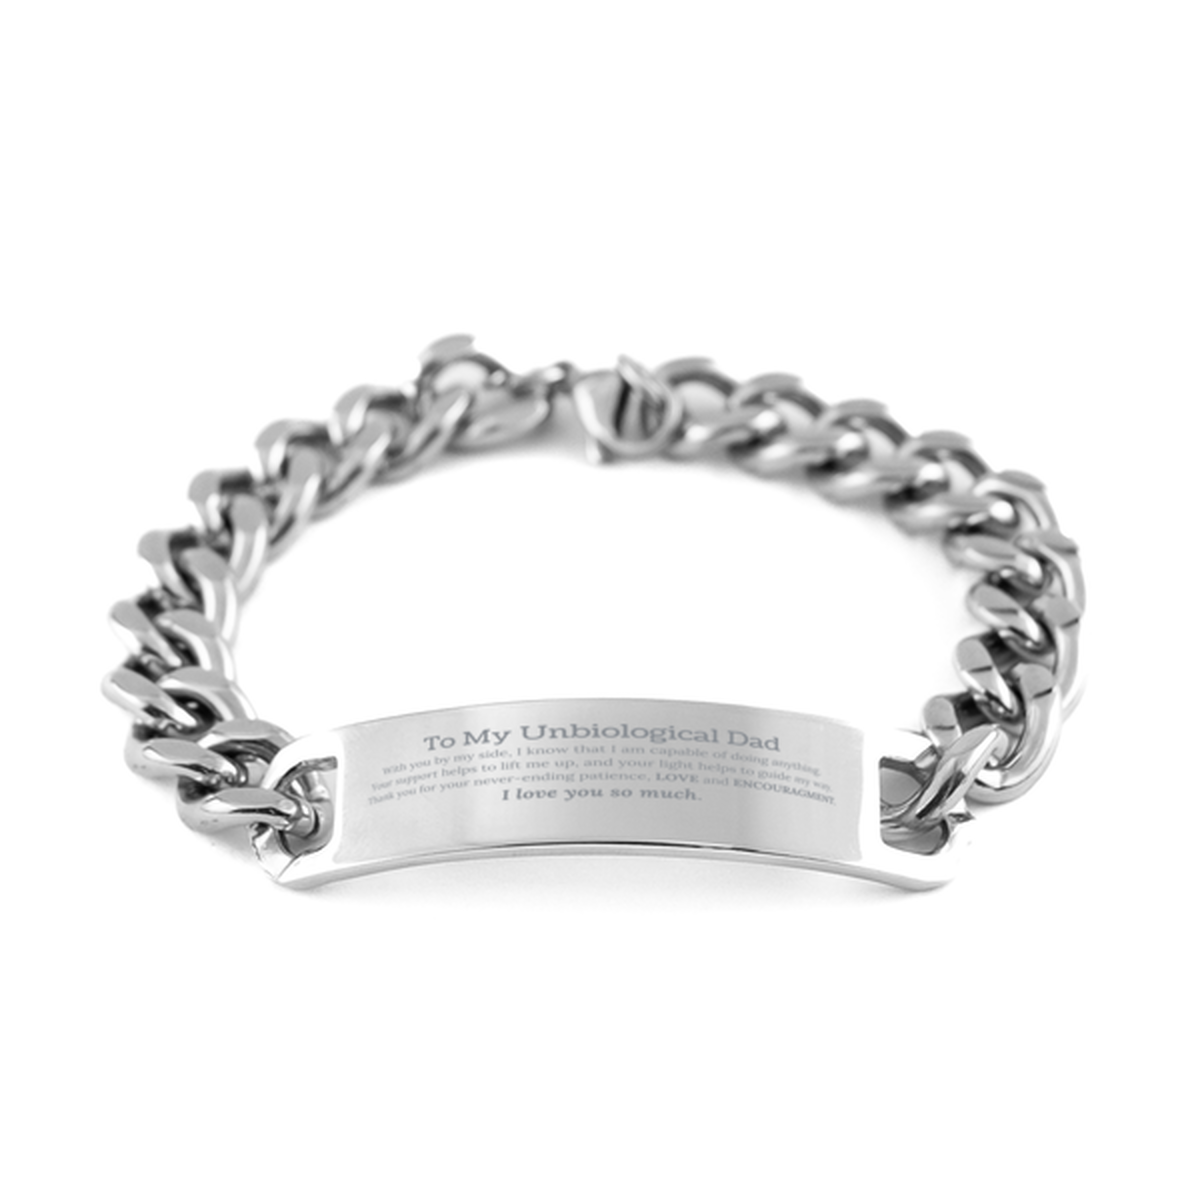 Appreciation Unbiological Dad Cuban Chain Stainless Steel Bracelet Gifts, To My Unbiological Dad Birthday Christmas Wedding Keepsake Gifts for Unbiological Dad With you by my side, I know that I am capable of doing anything. I love you so much